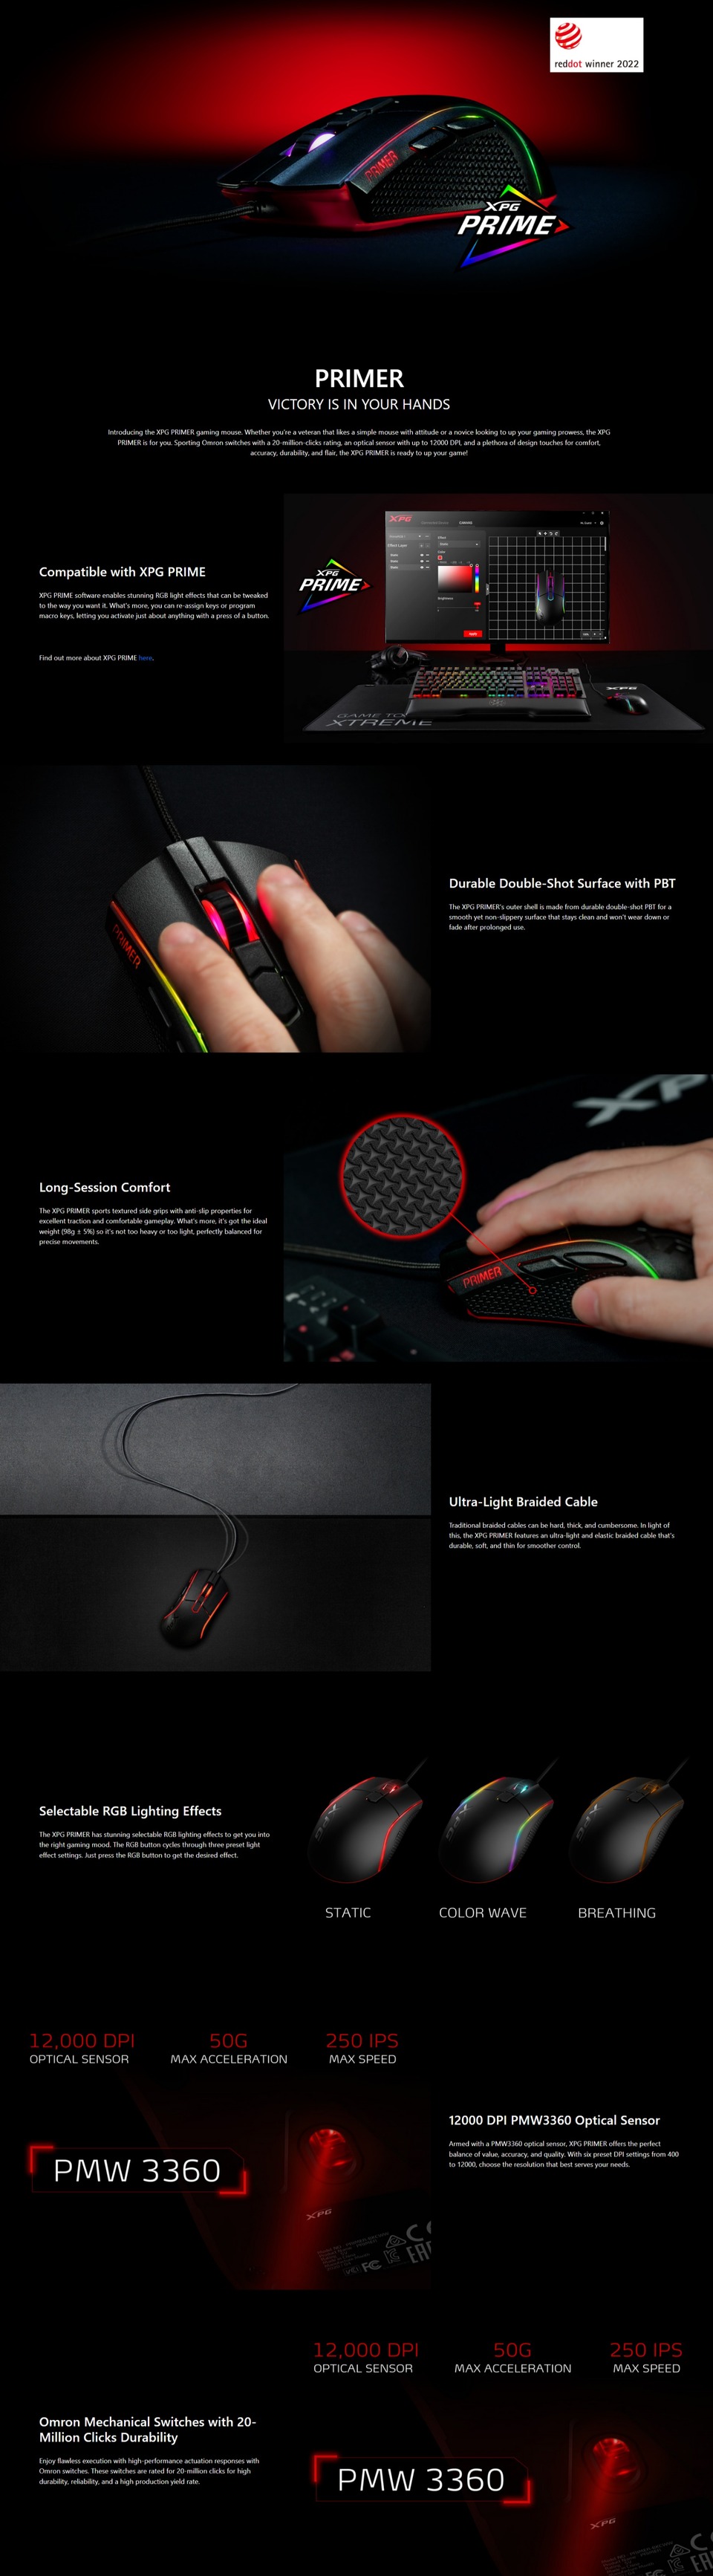 adata xpg primer wired gaming mouse